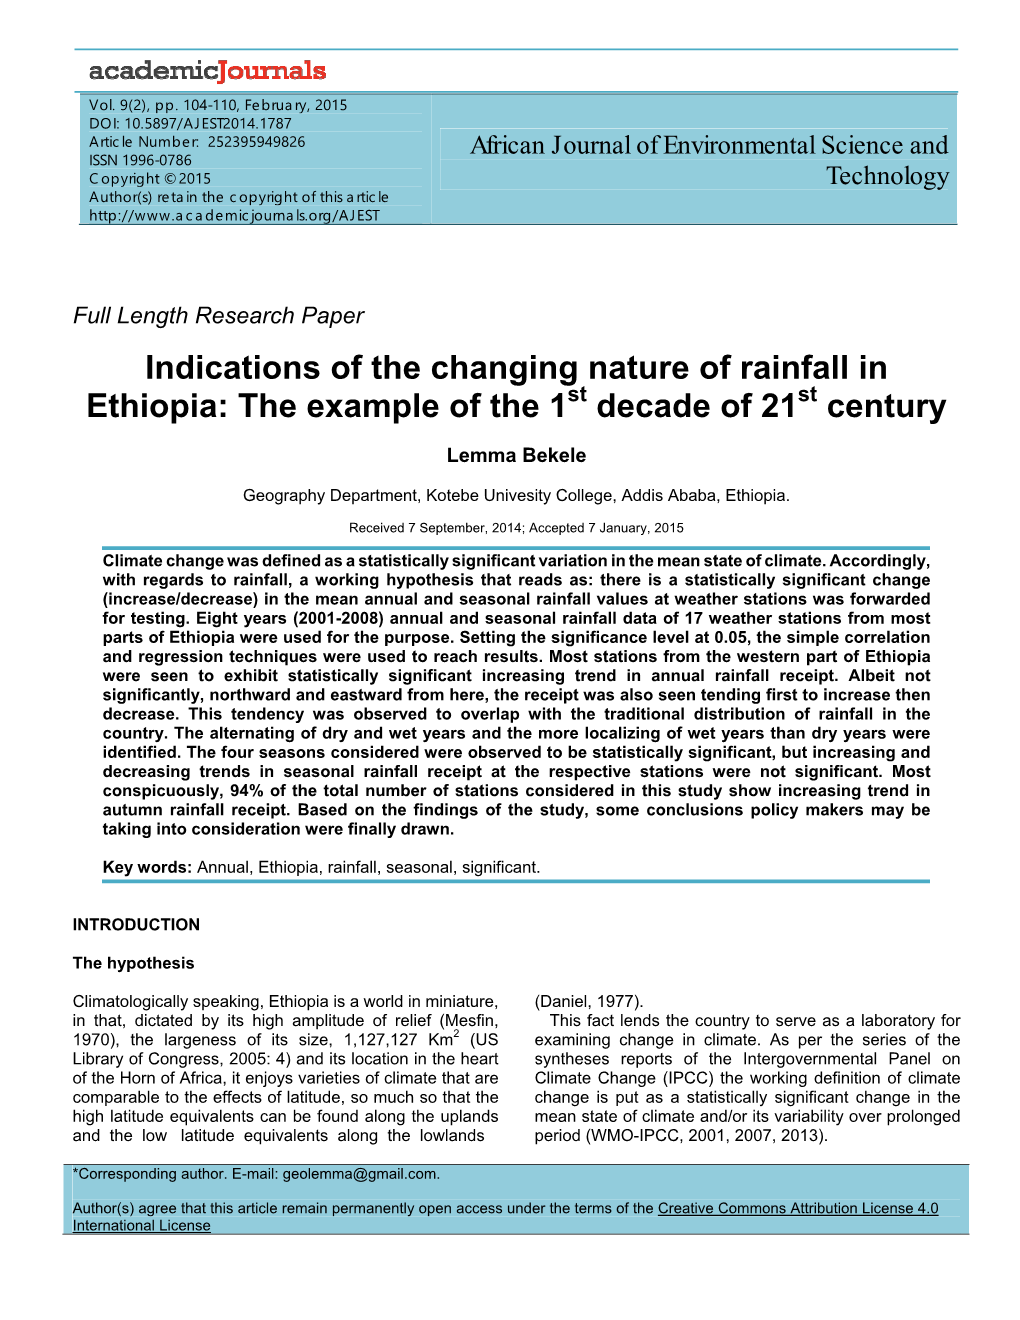 Indications of the Changing Nature of Rainfall in Ethiopia: the Example of the 1St Decade of 21St Century